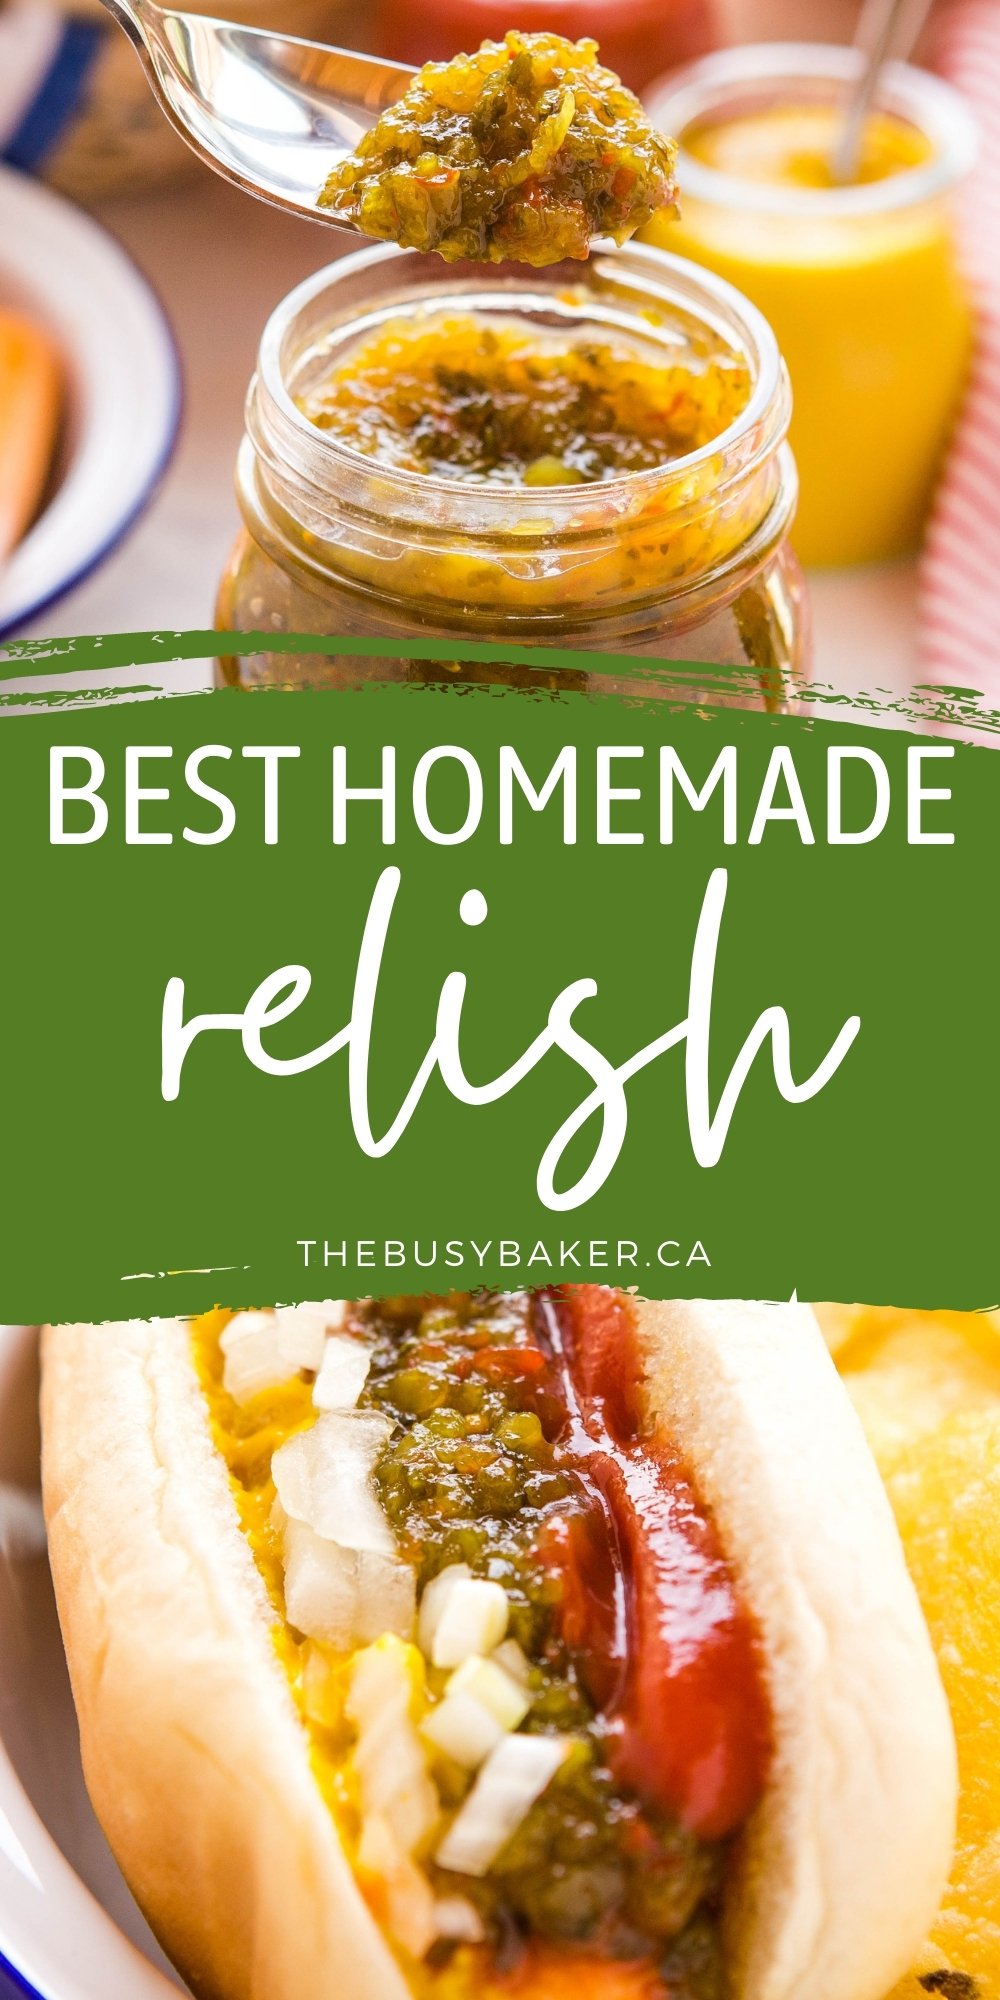 This Relish recipe is a classic condiment for summer! Homemade with simple ingredients, and perfect on hot dogs and hamburgers! Recipe from thebusybaker.ca! #relish #hotdogs #hamburgers #barbecue #condiments #barbecue #summer #party #pickles via @busybakerblog